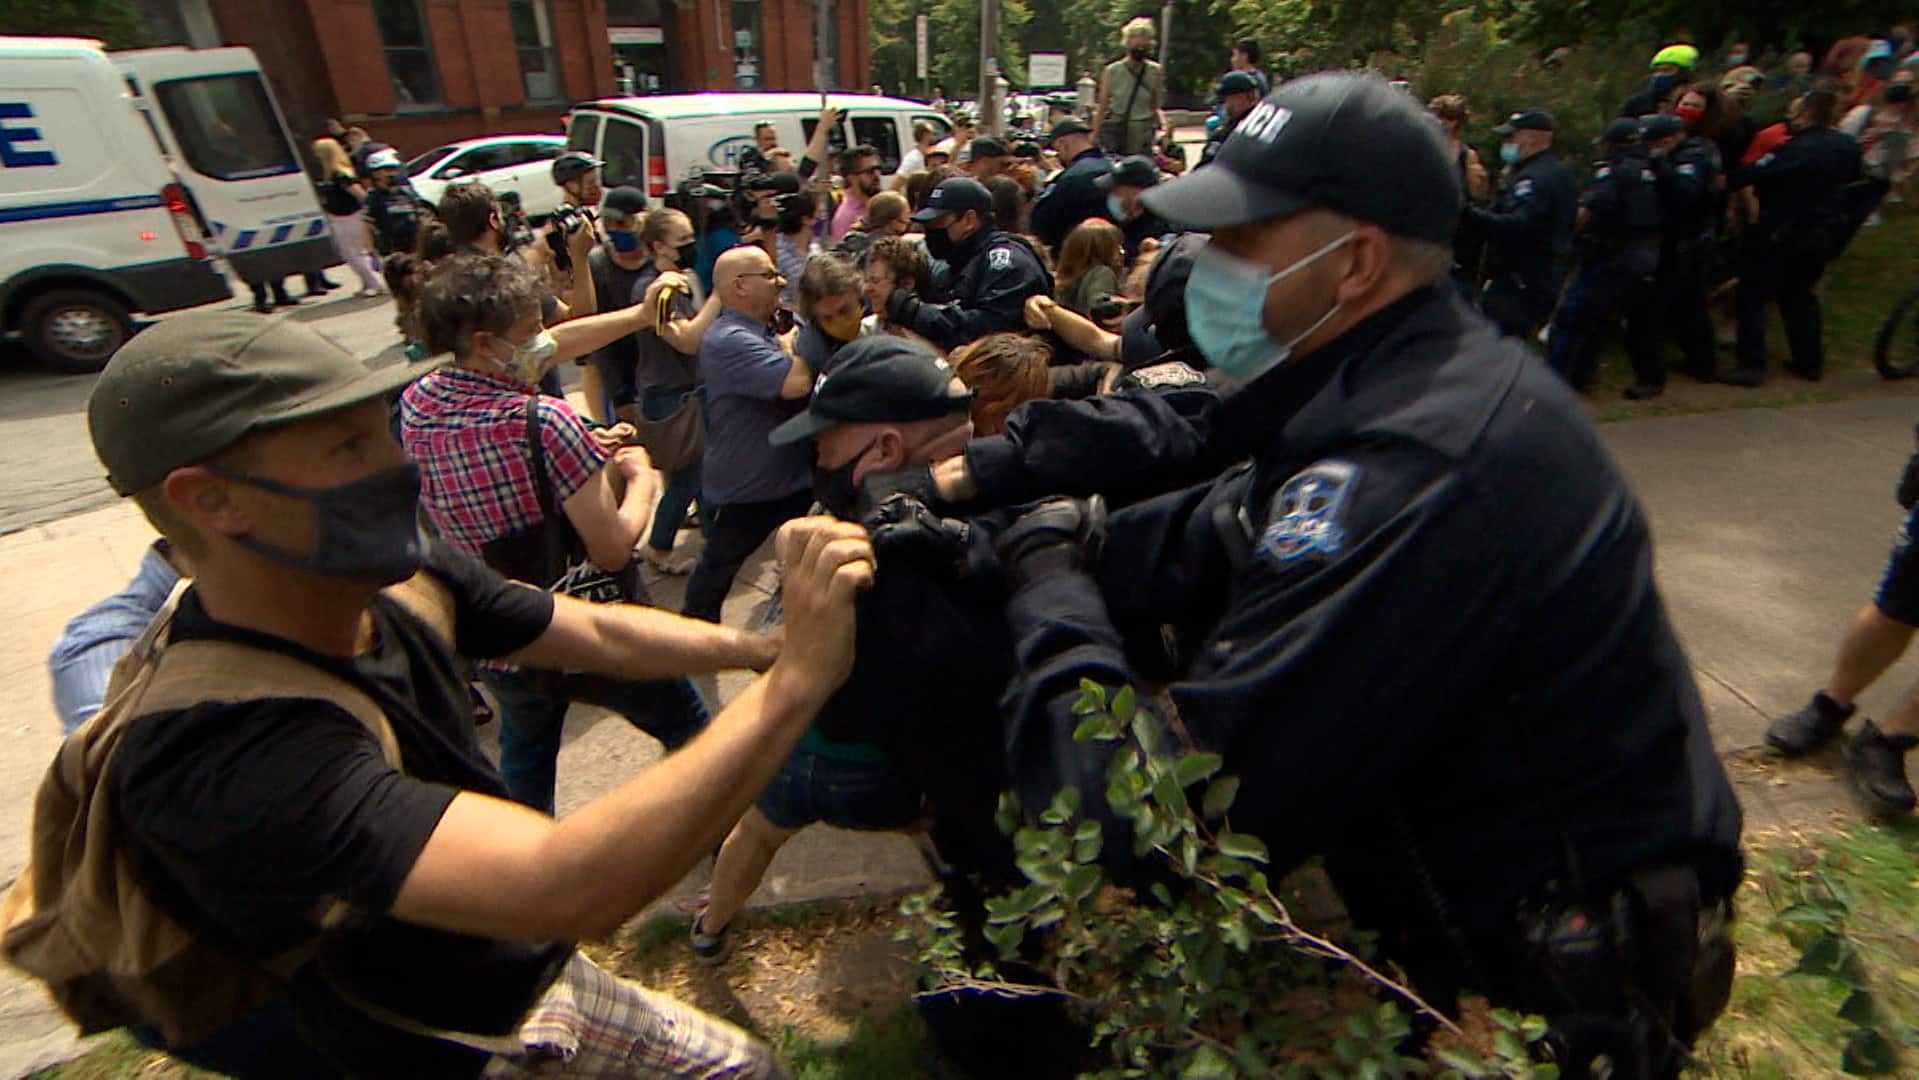 what happened when halifax police pepper sprayed people protesting removal of shelters for homeless people 1